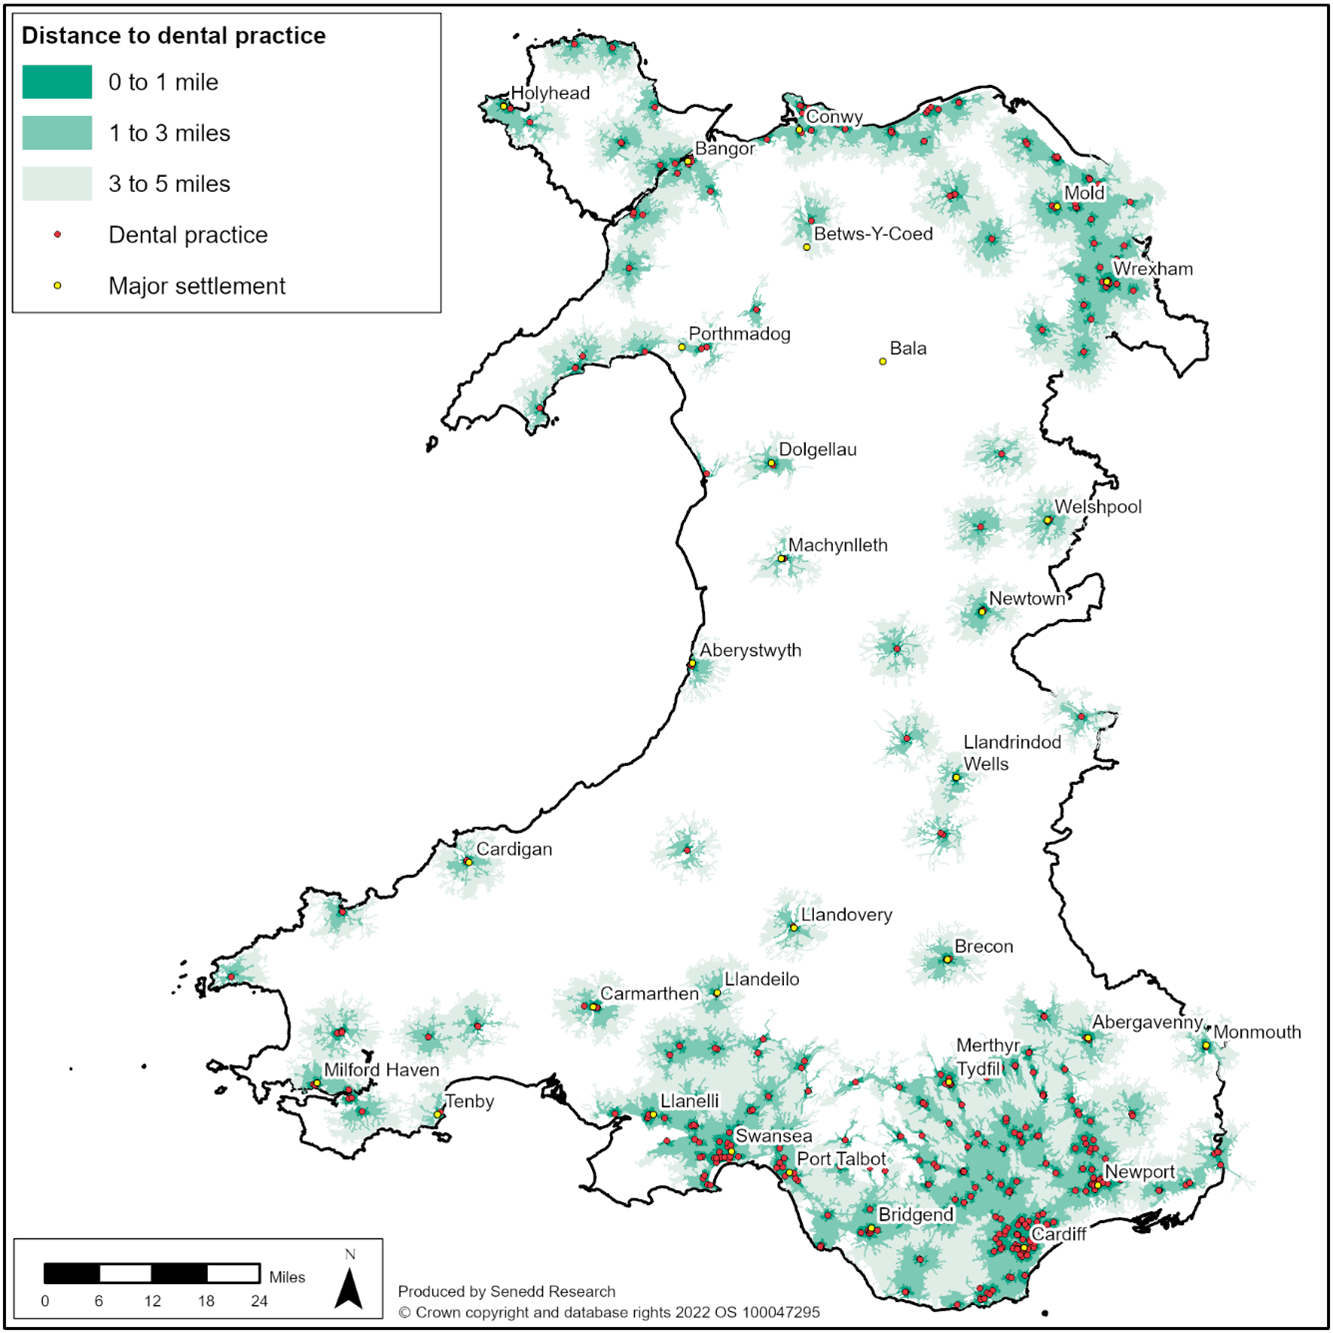 Map shows the location of NHS dental practices in Wales and highlights the area within certain travel distances of them. There is a greater concentration of dental practices in South Wales and along the North Wales coast. Dental practices are sparsely distributed in mid-Wales.